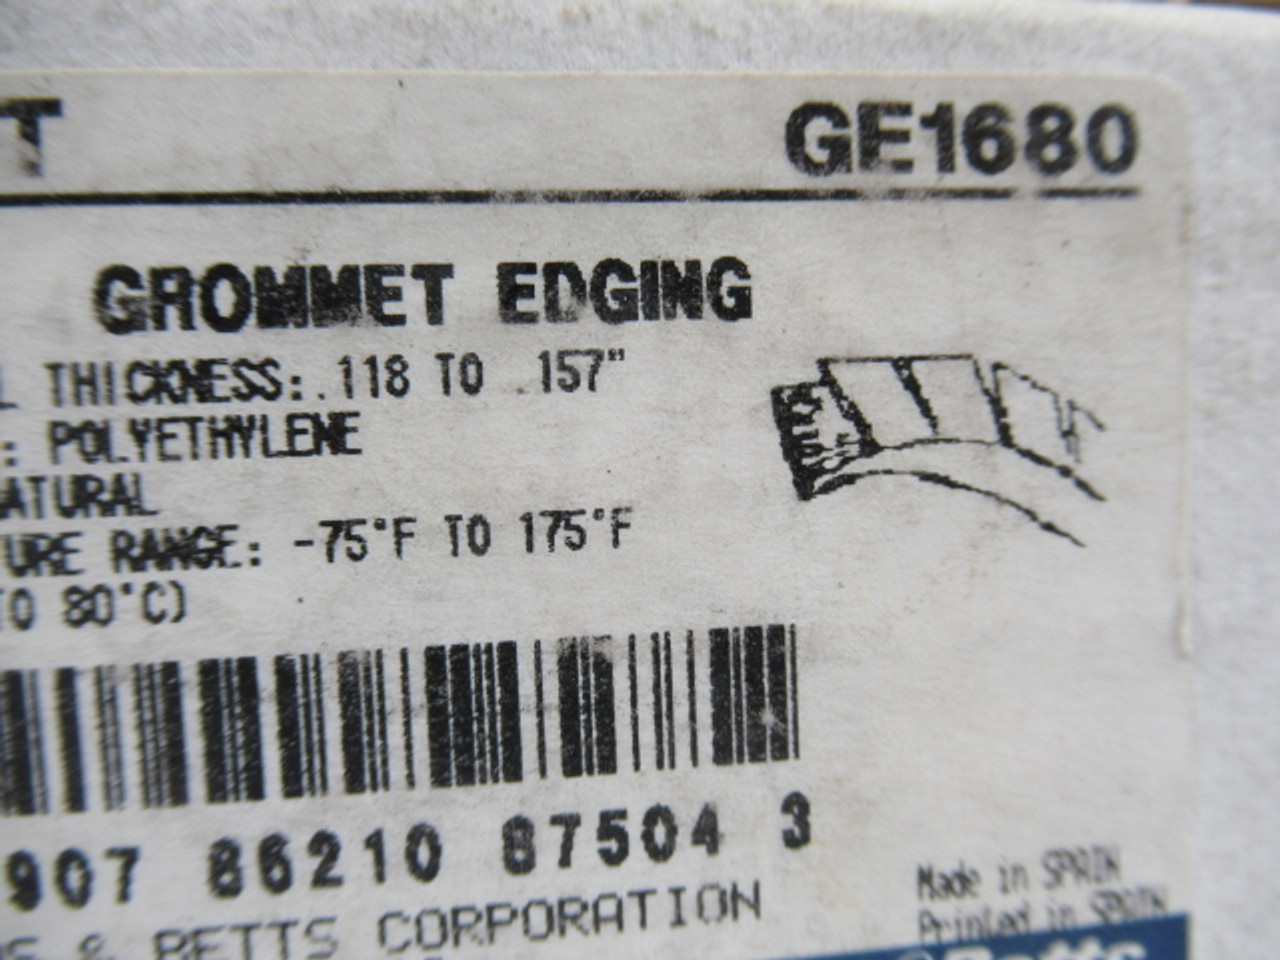 Thomas & Betts GE1680 Grommet Edging For Panel Thickness .118-.157" ! NOP !